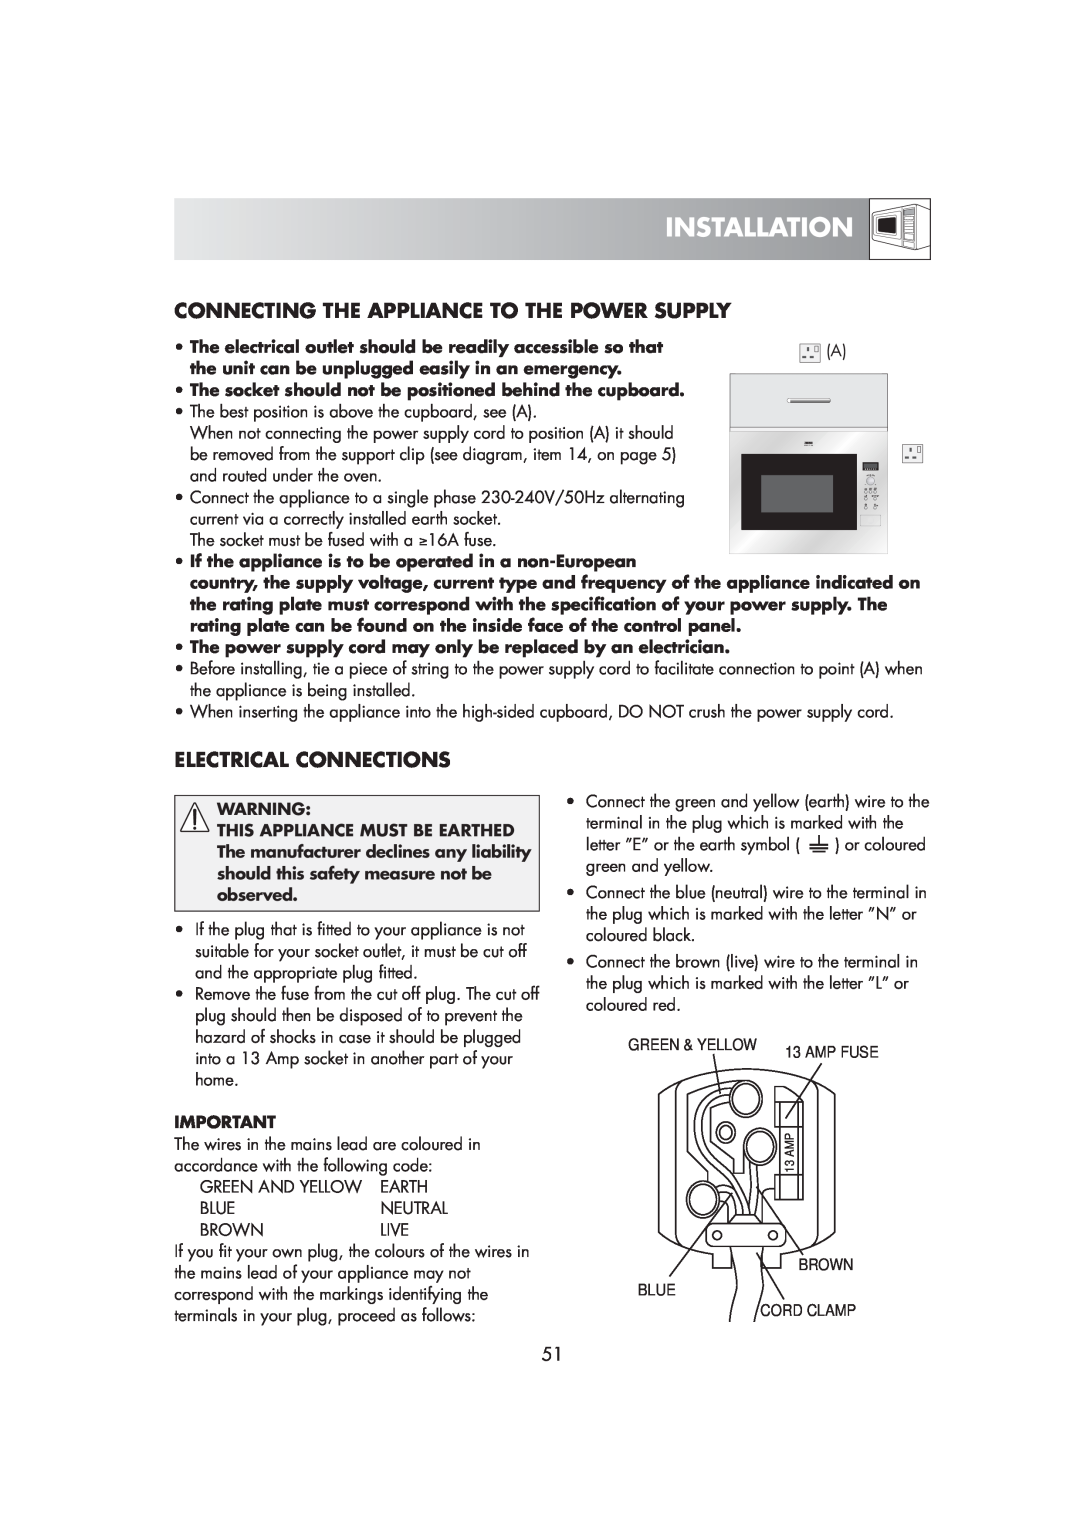 Zanussi ZM266STG manual Connecting The Appliance To The Power Supply, Electrical Connections, Installation, Green & Yellow 